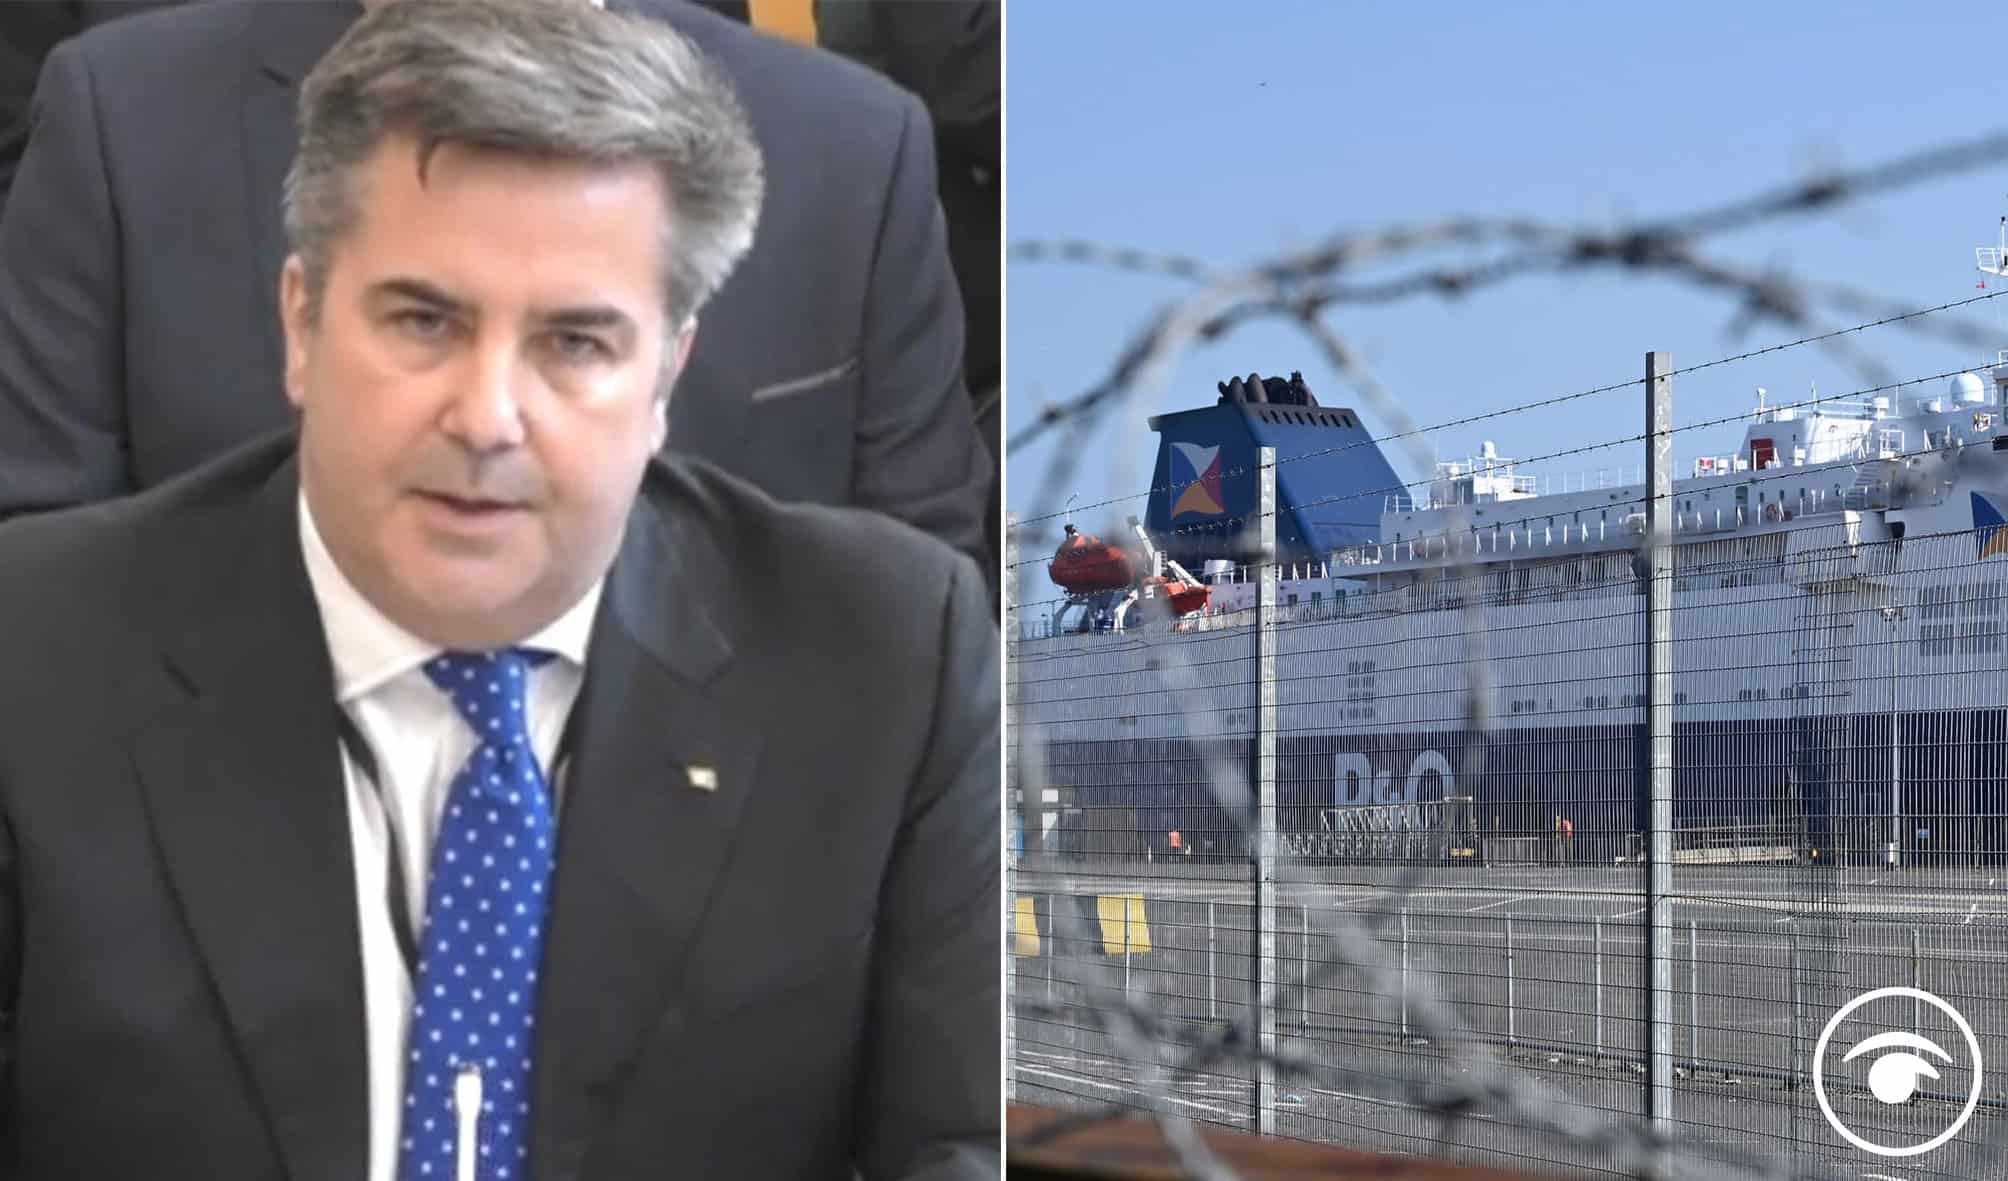 P&O boss accused of ‘corporate terrorism’ as he claims seafaring about more than money